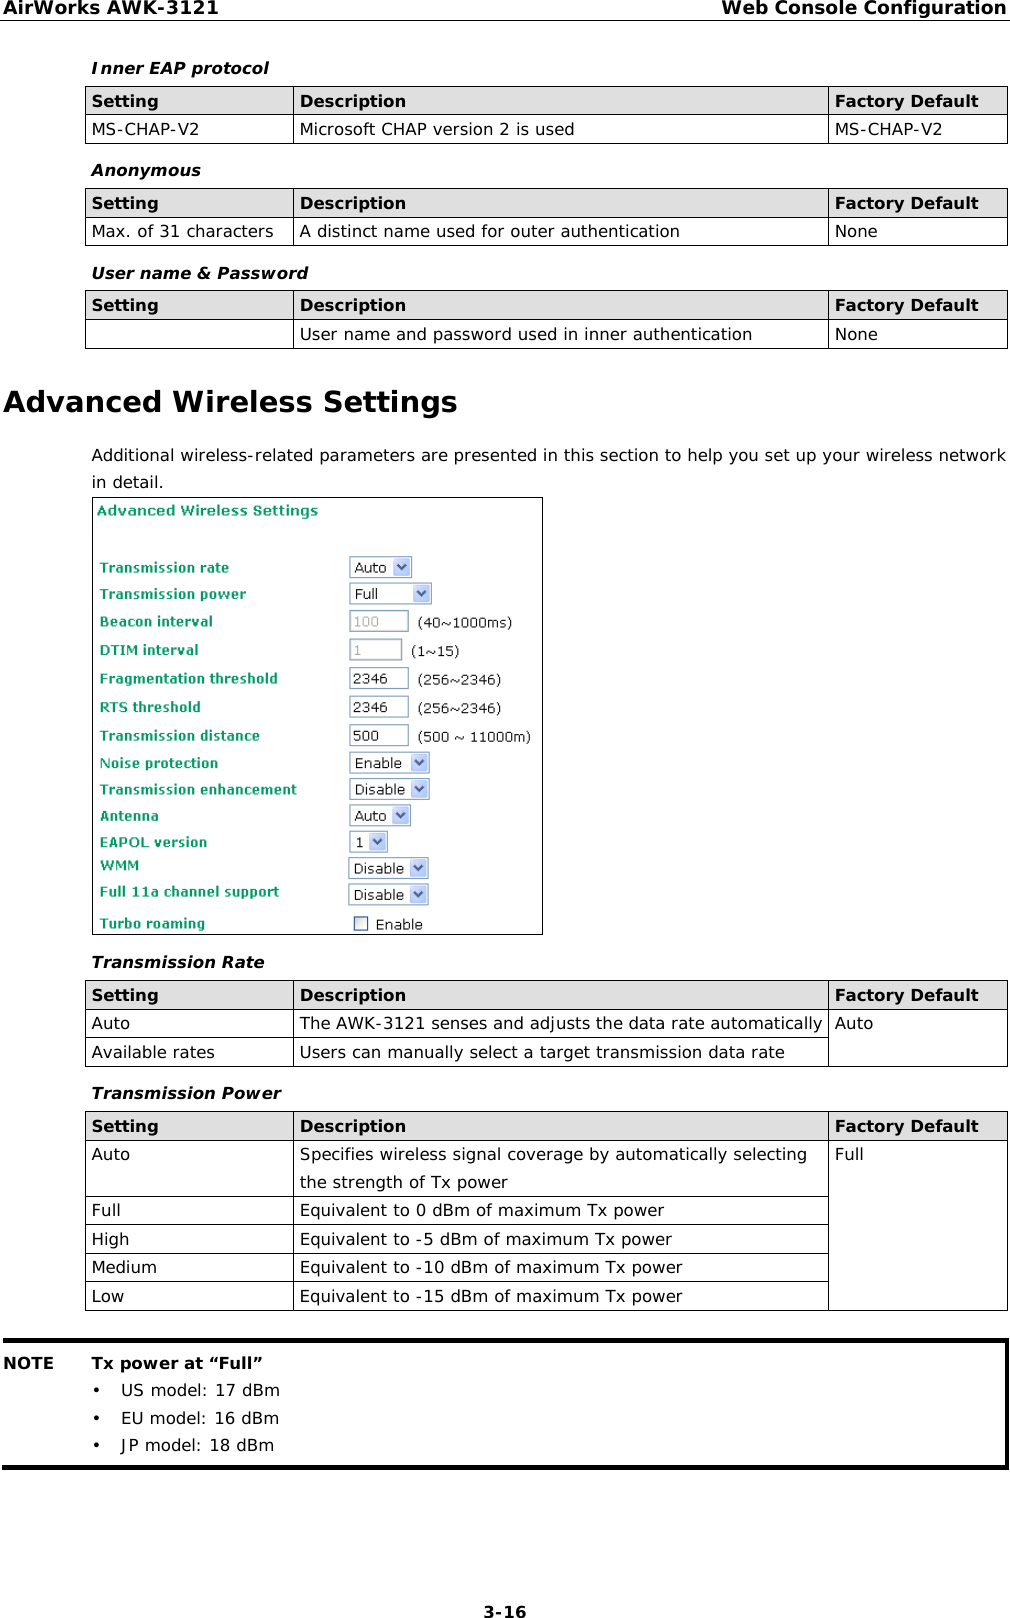 AirWorks AWK-3121  Web Console Configuration  3-16Inner EAP protocol Setting  Description  Factory Default MS-CHAP-V2  Microsoft CHAP version 2 is used  MS-CHAP-V2 Anonymous Setting  Description  Factory Default Max. of 31 characters  A distinct name used for outer authentication None User name &amp; Password Setting  Description  Factory Default   User name and password used in inner authentication  None Advanced Wireless Settings Additional wireless-related parameters are presented in this section to help you set up your wireless network in detail.  Transmission Rate Setting  Description  Factory Default Auto  The AWK-3121 senses and adjusts the data rate automatically  Auto Available rates  Users can manually select a target transmission data rate Transmission Power Setting  Description  Factory Default Auto  Specifies wireless signal coverage by automatically selecting the strength of Tx power  Full Full  Equivalent to 0 dBm of maximum Tx power High  Equivalent to -5 dBm of maximum Tx power Medium  Equivalent to -10 dBm of maximum Tx power Low  Equivalent to -15 dBm of maximum Tx power  NOTE  Tx power at “Full” • US model: 17 dBm • EU model: 16 dBm • JP model: 18 dBm    